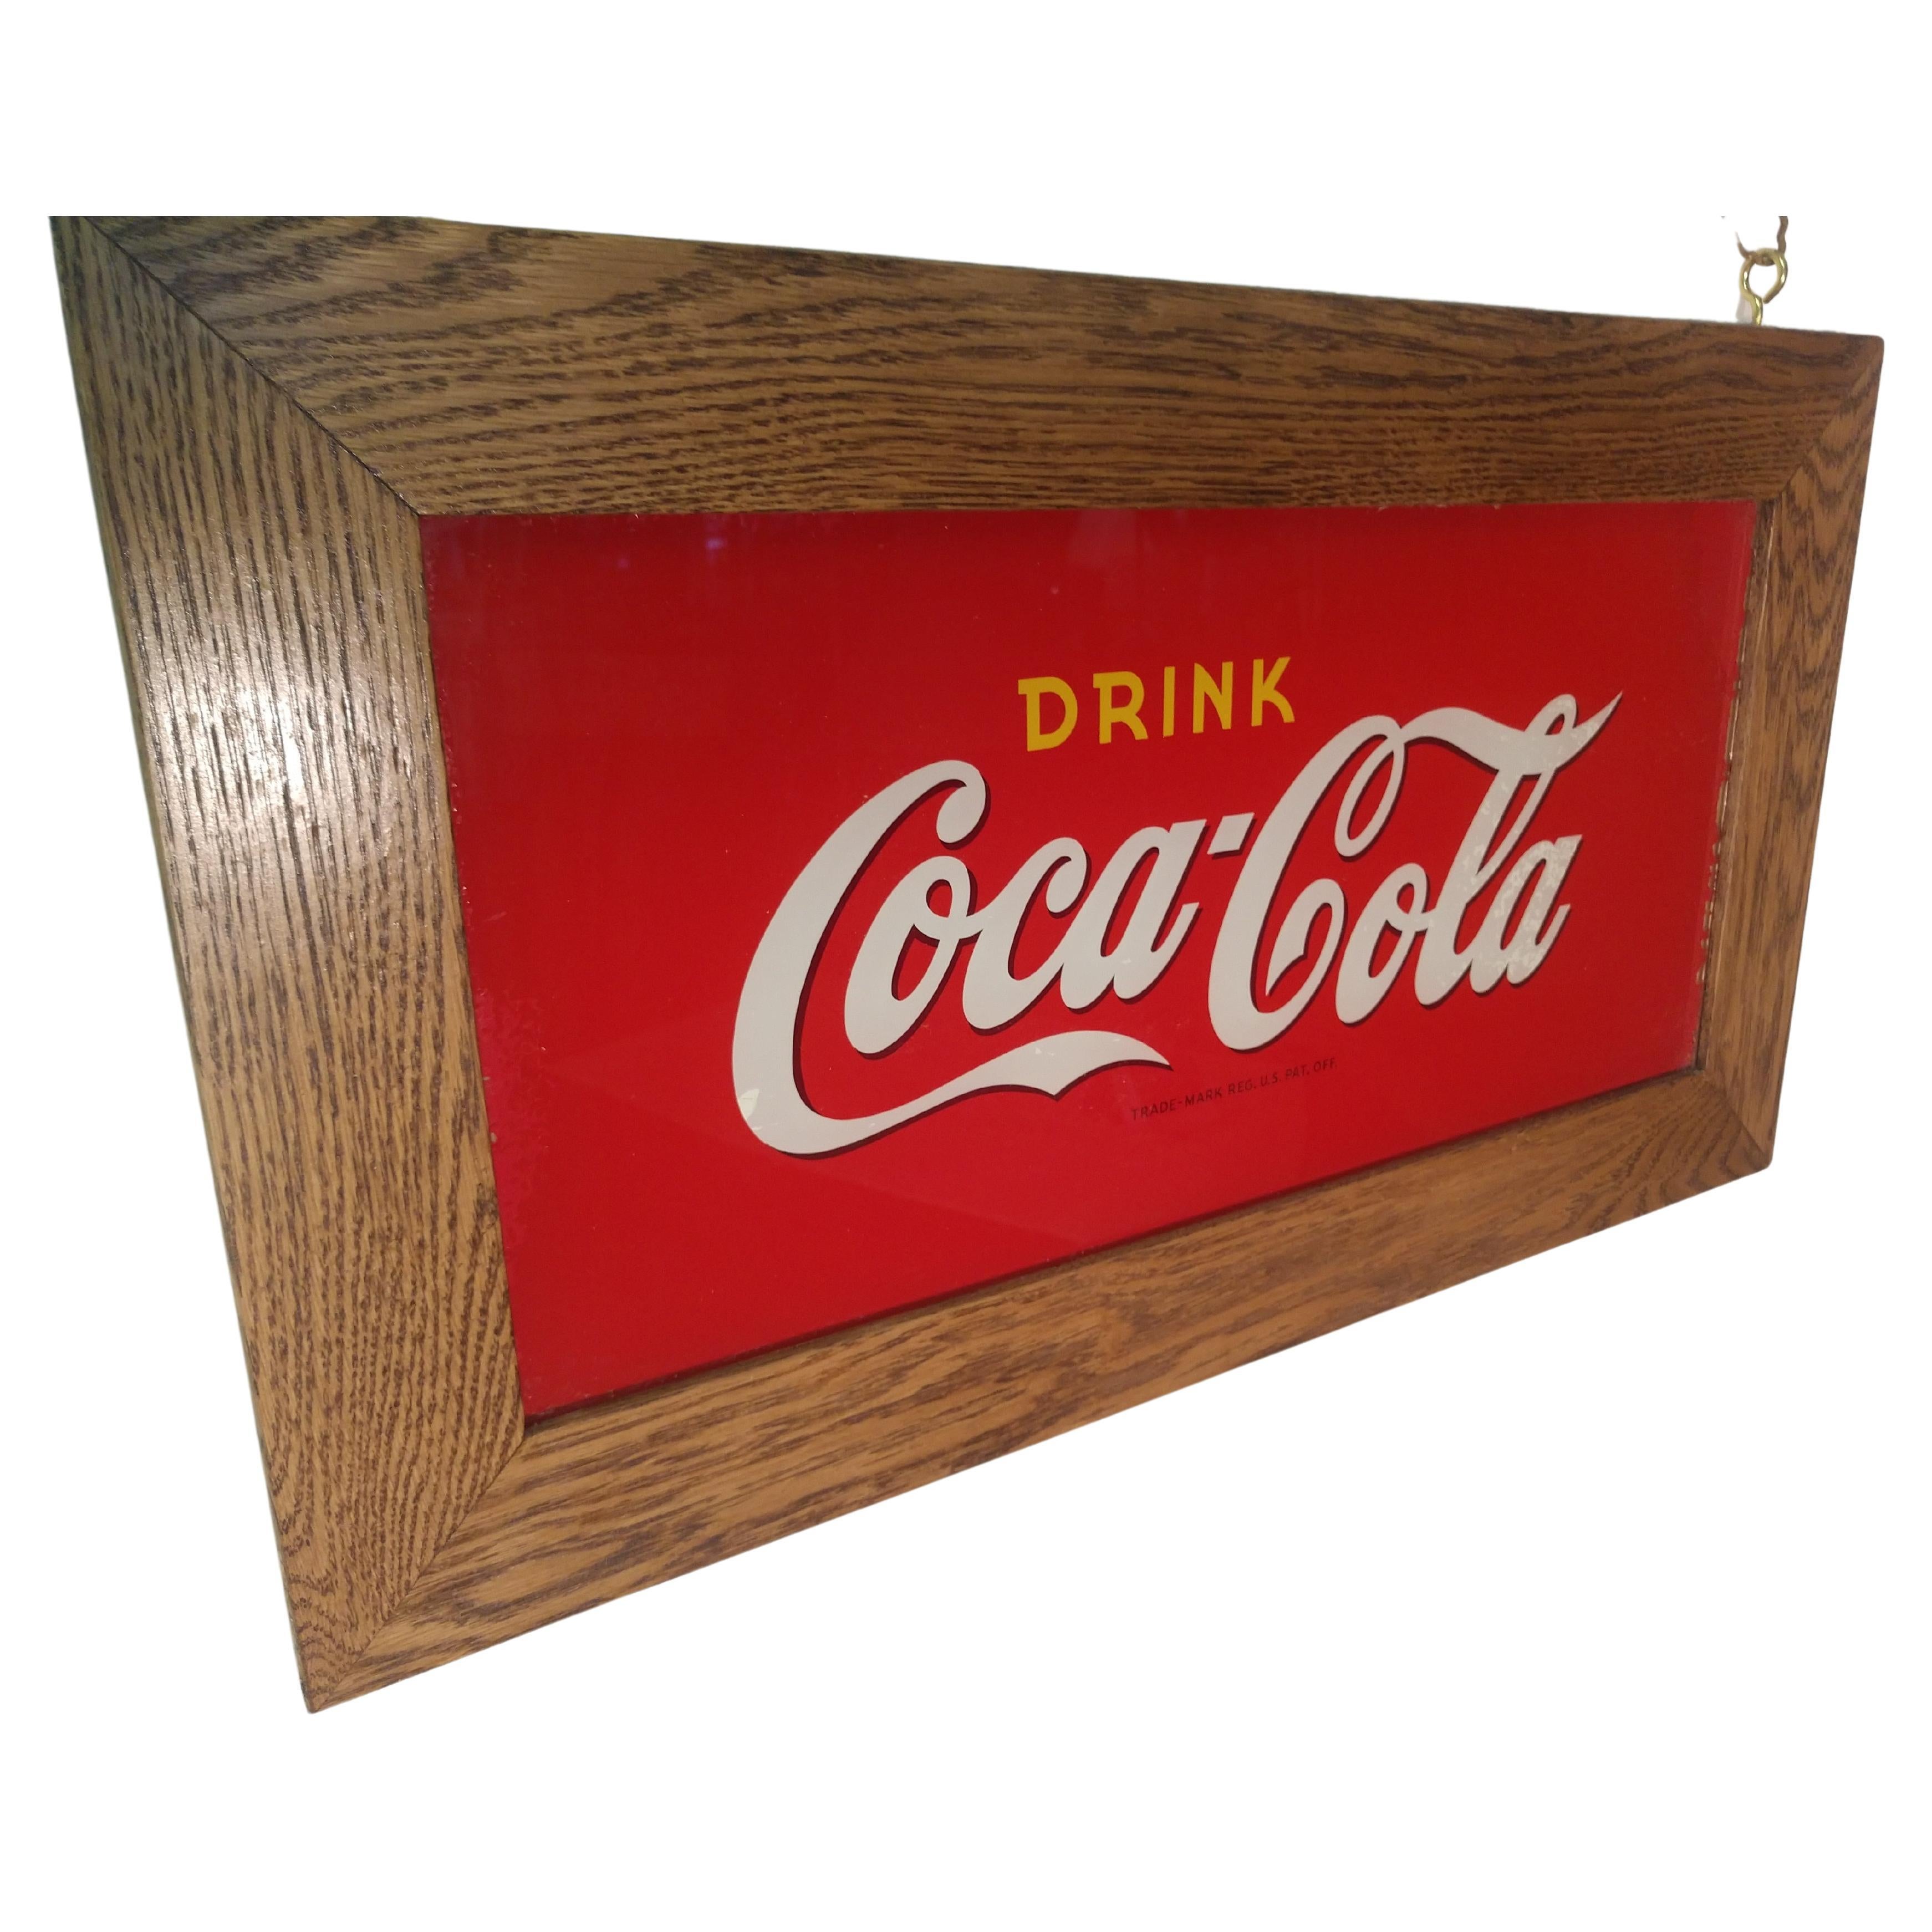 Fabulous 10 x 21 reverse painted glass coca cola sign from the twenties. In excellent vintage condition with a bit of fixing on the upper right corner. Made by the Price Bros. from Chicago for the Coca Cola bottling co.
Strong color retention and